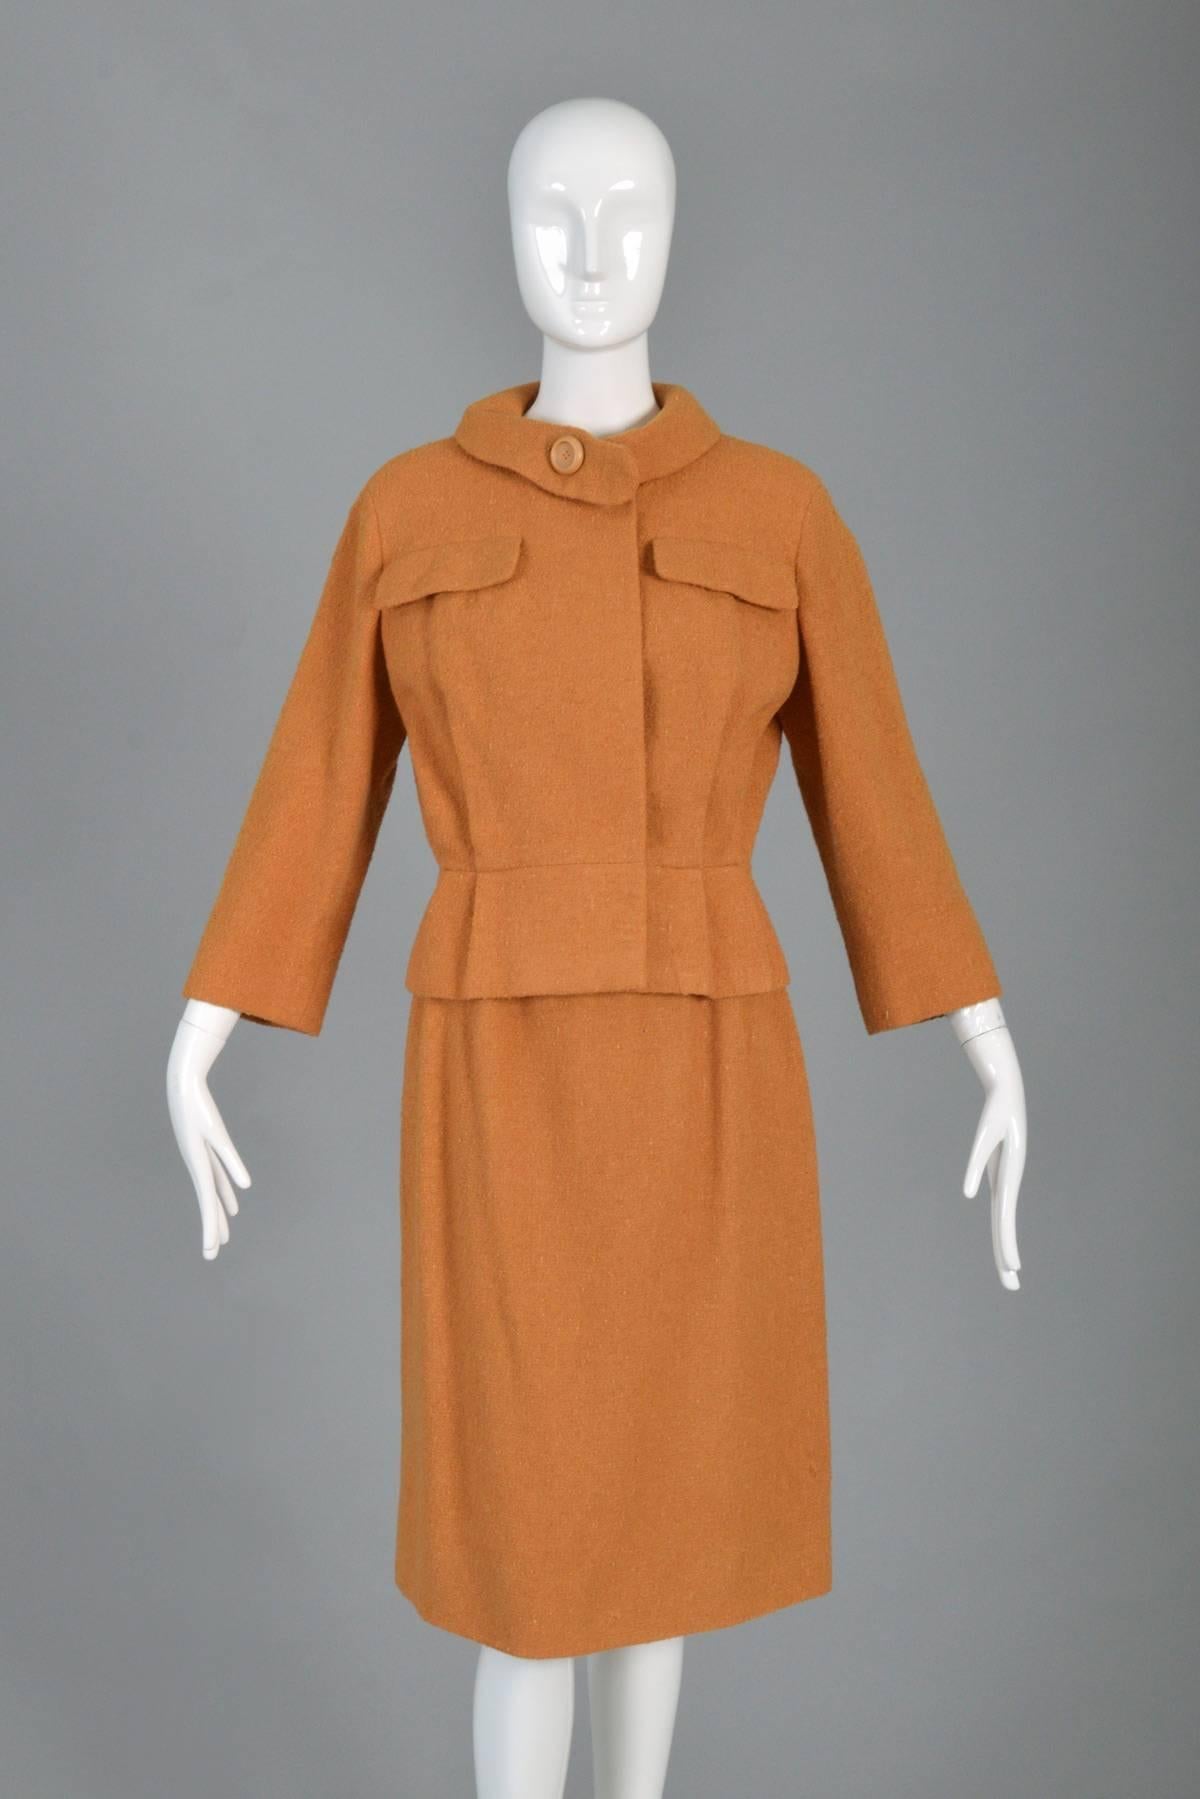 Perfect vintage mid-to-late 60s skirt suit by Marc Bohan for Christian Dior New York. Fantastic pumpkin/terra cotta nubby wool fabric with silk lining. Pleat front jacket with nipped waist + super cute breast pockets. Double fold tab collar with